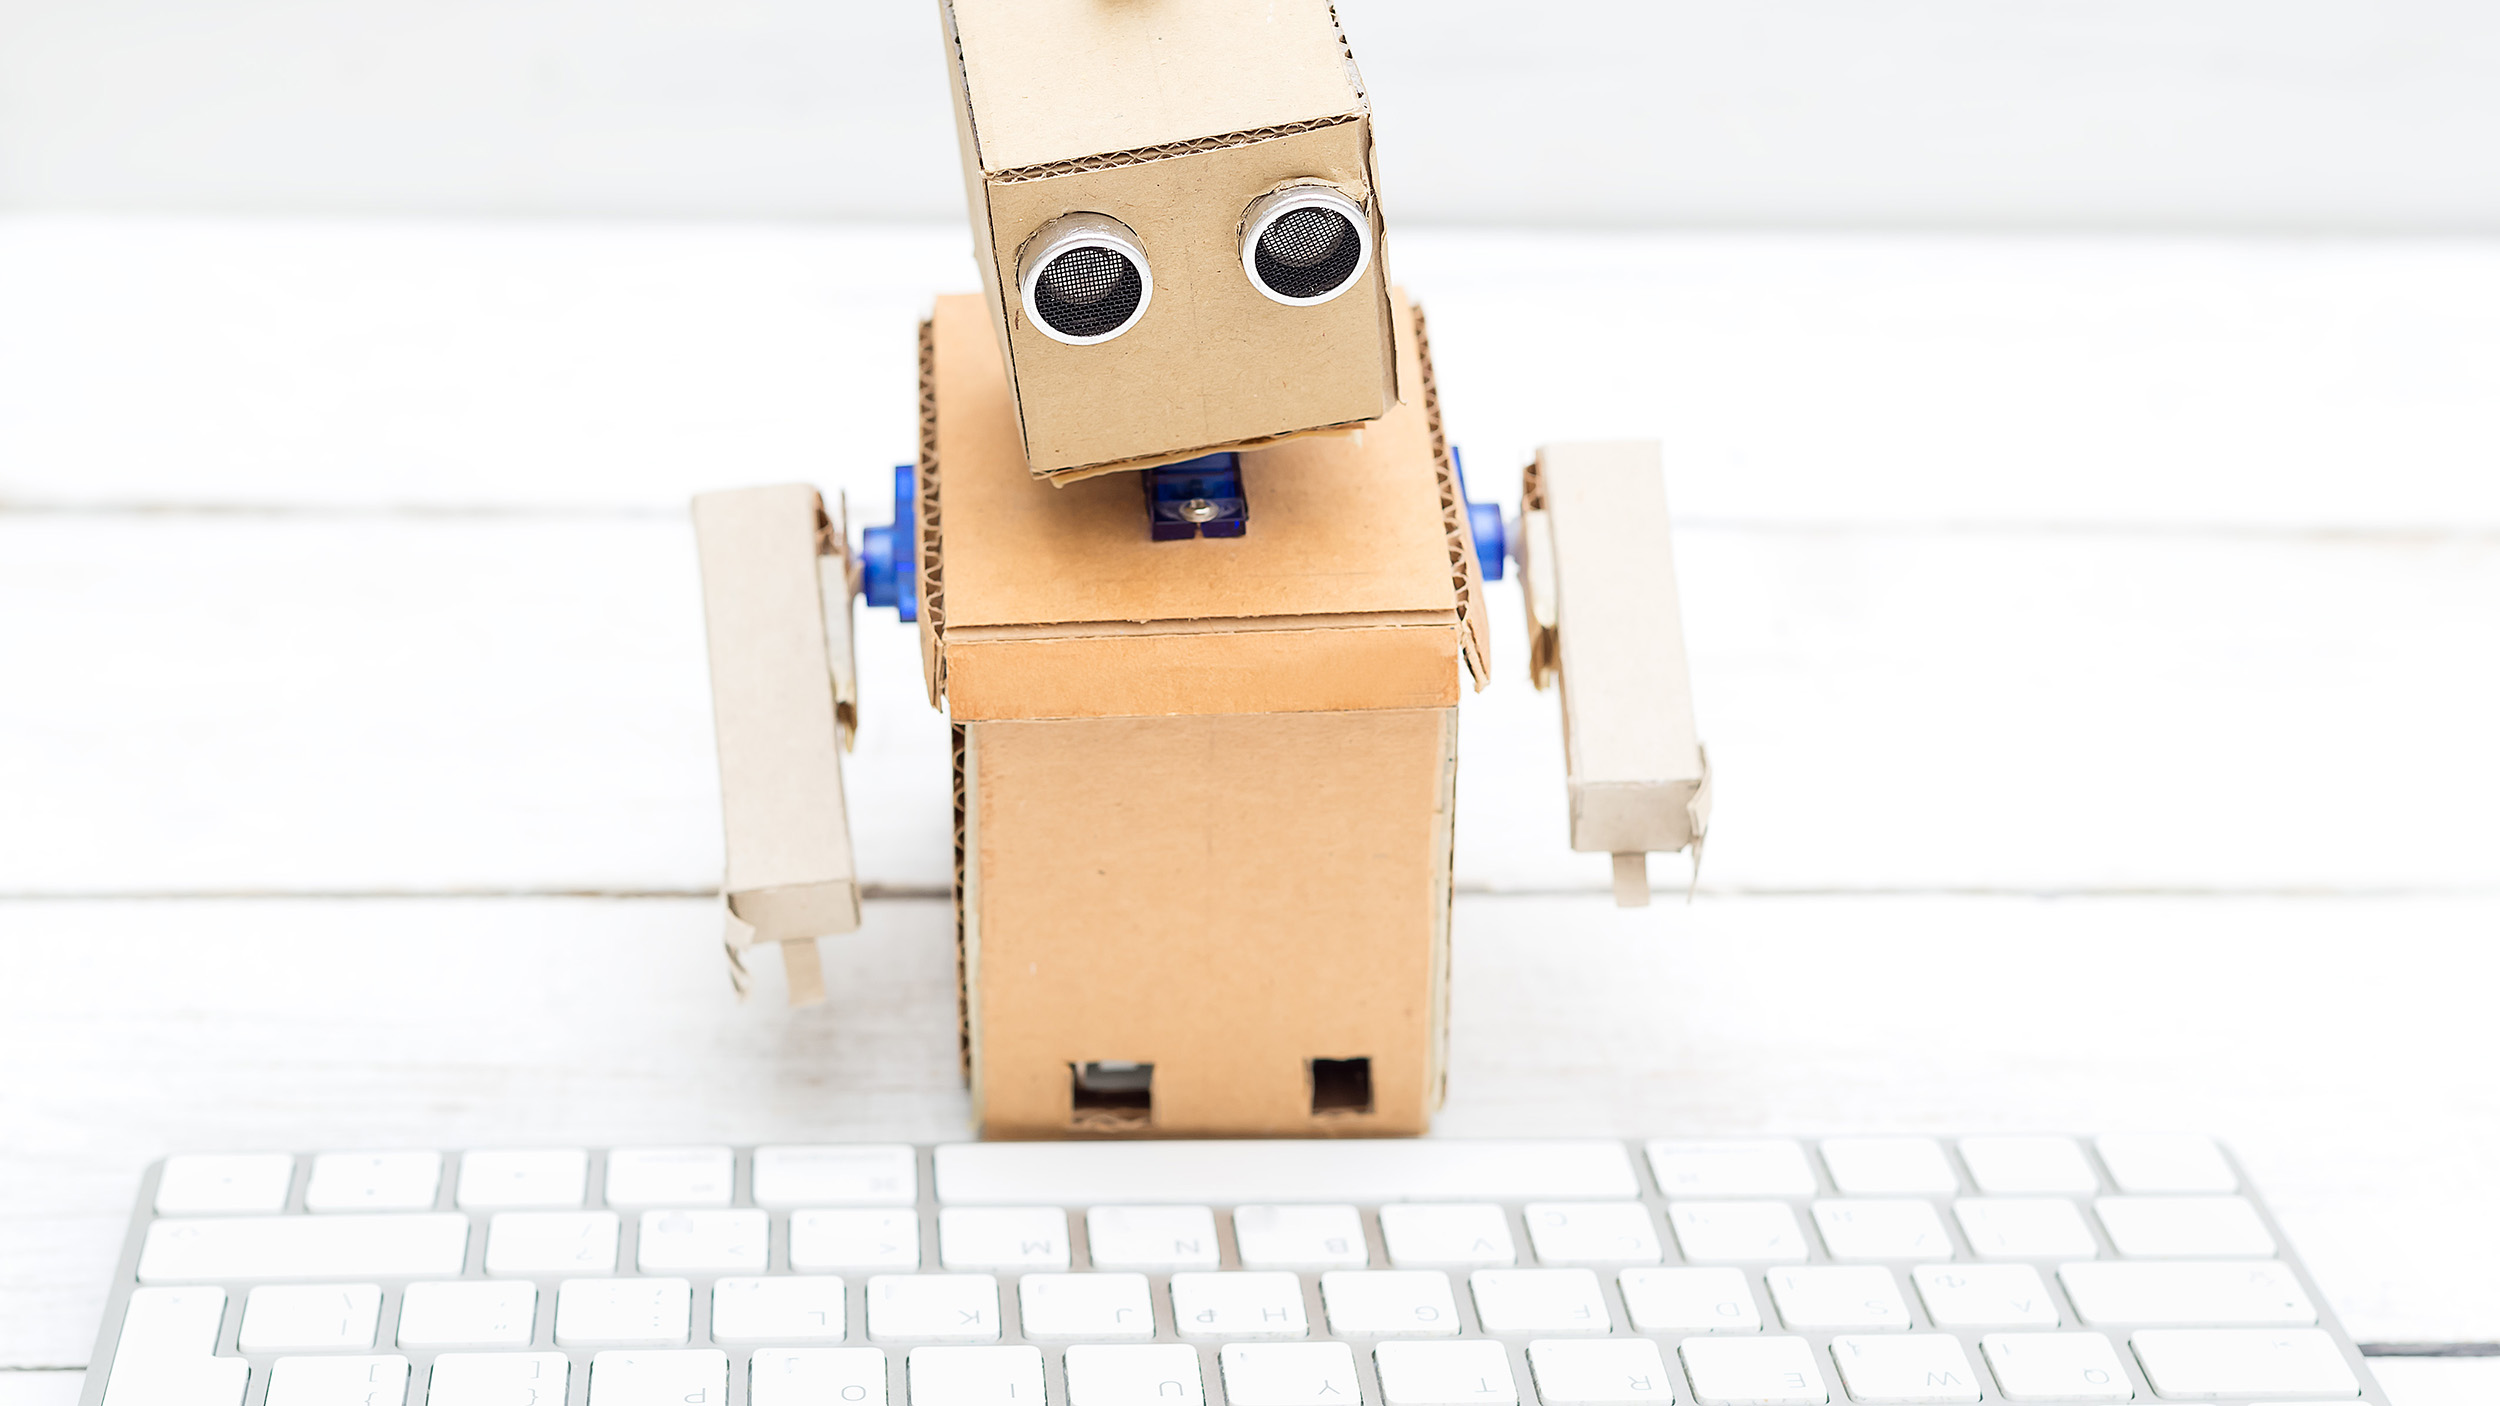 A small robot made of plywood sits on a white plank surface and is facing a white keyboard.